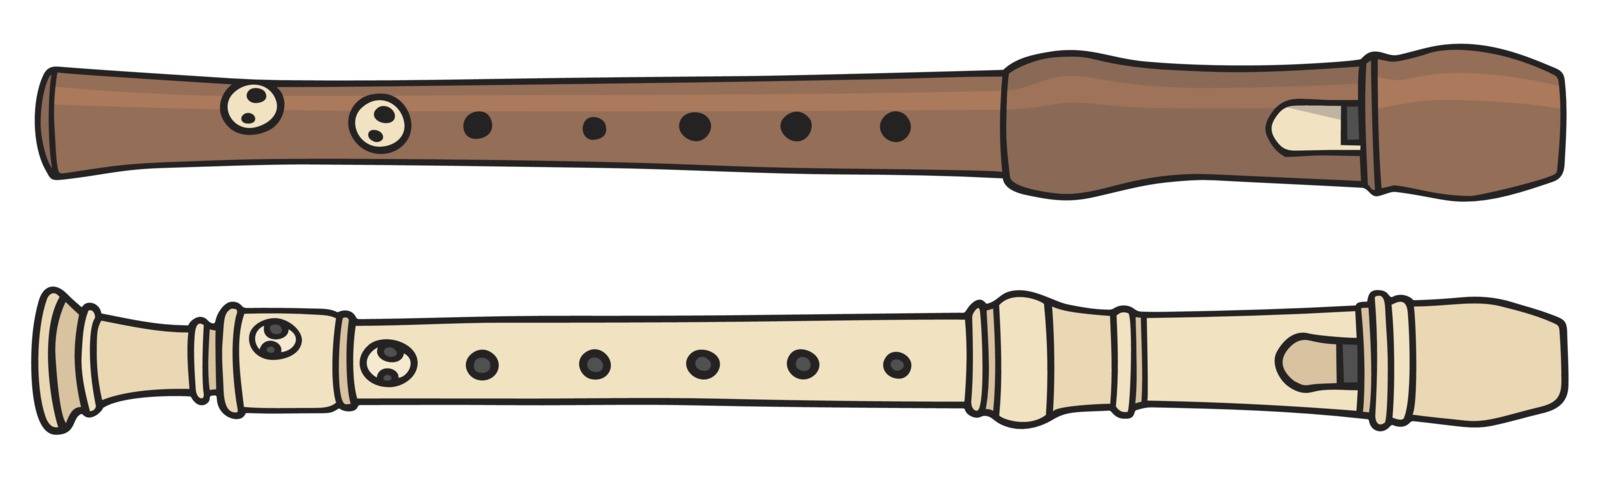 Hand drawing of two classic recorders